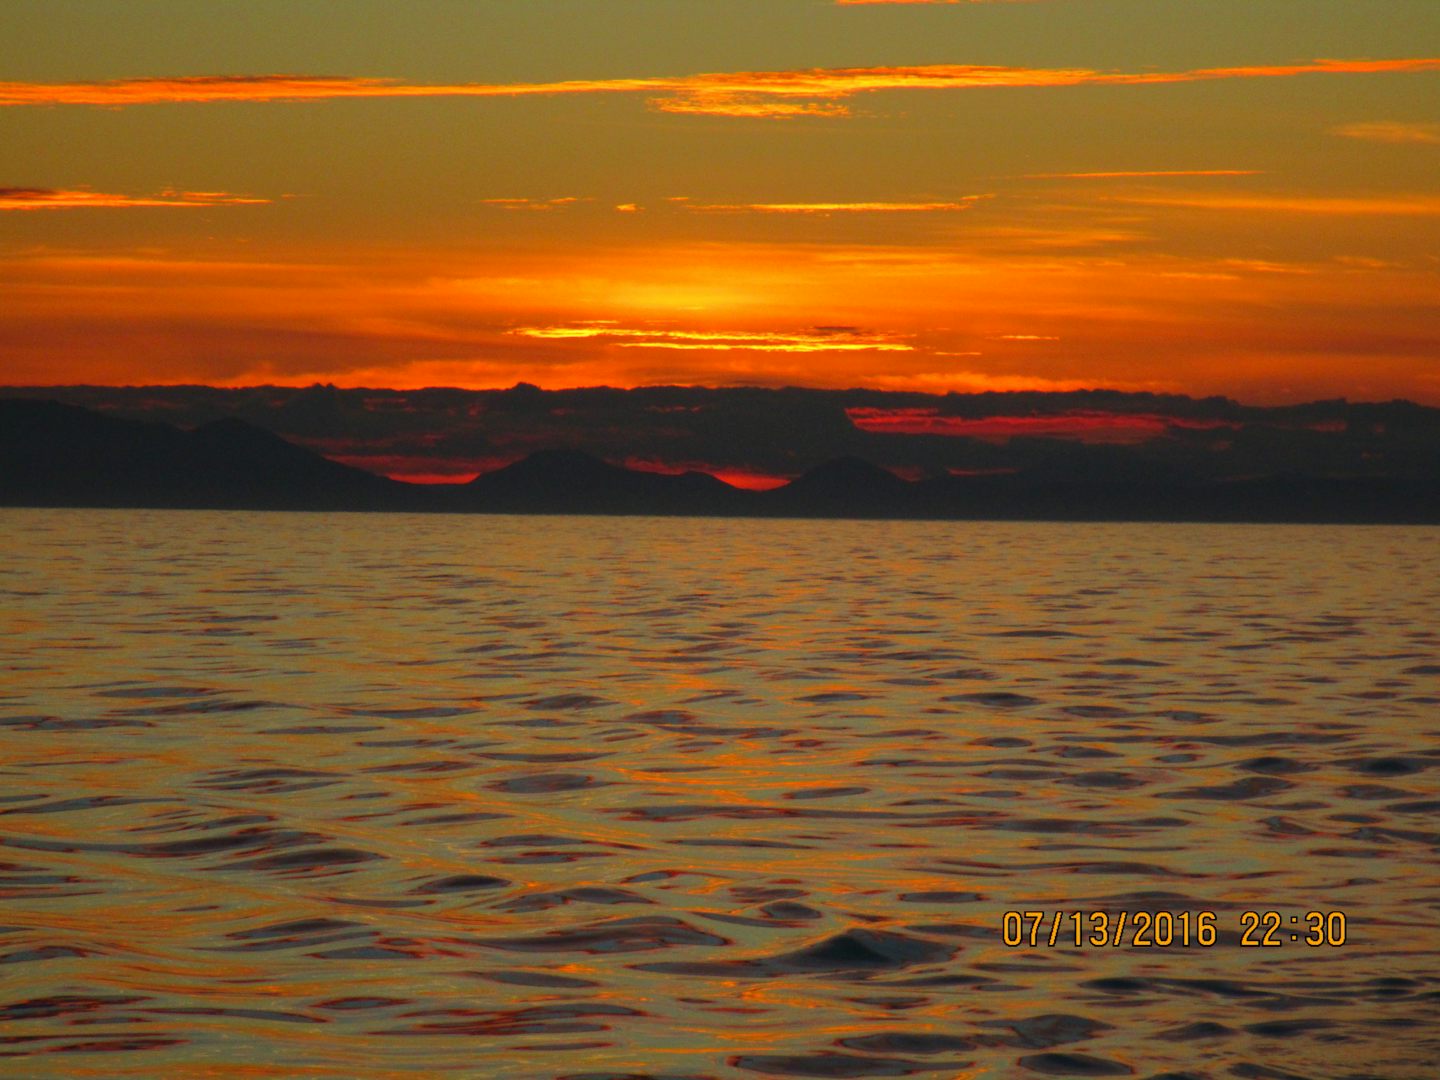 The quiet calm seas of the Alaskan Inside Passage highlighted by a beautiful sunset